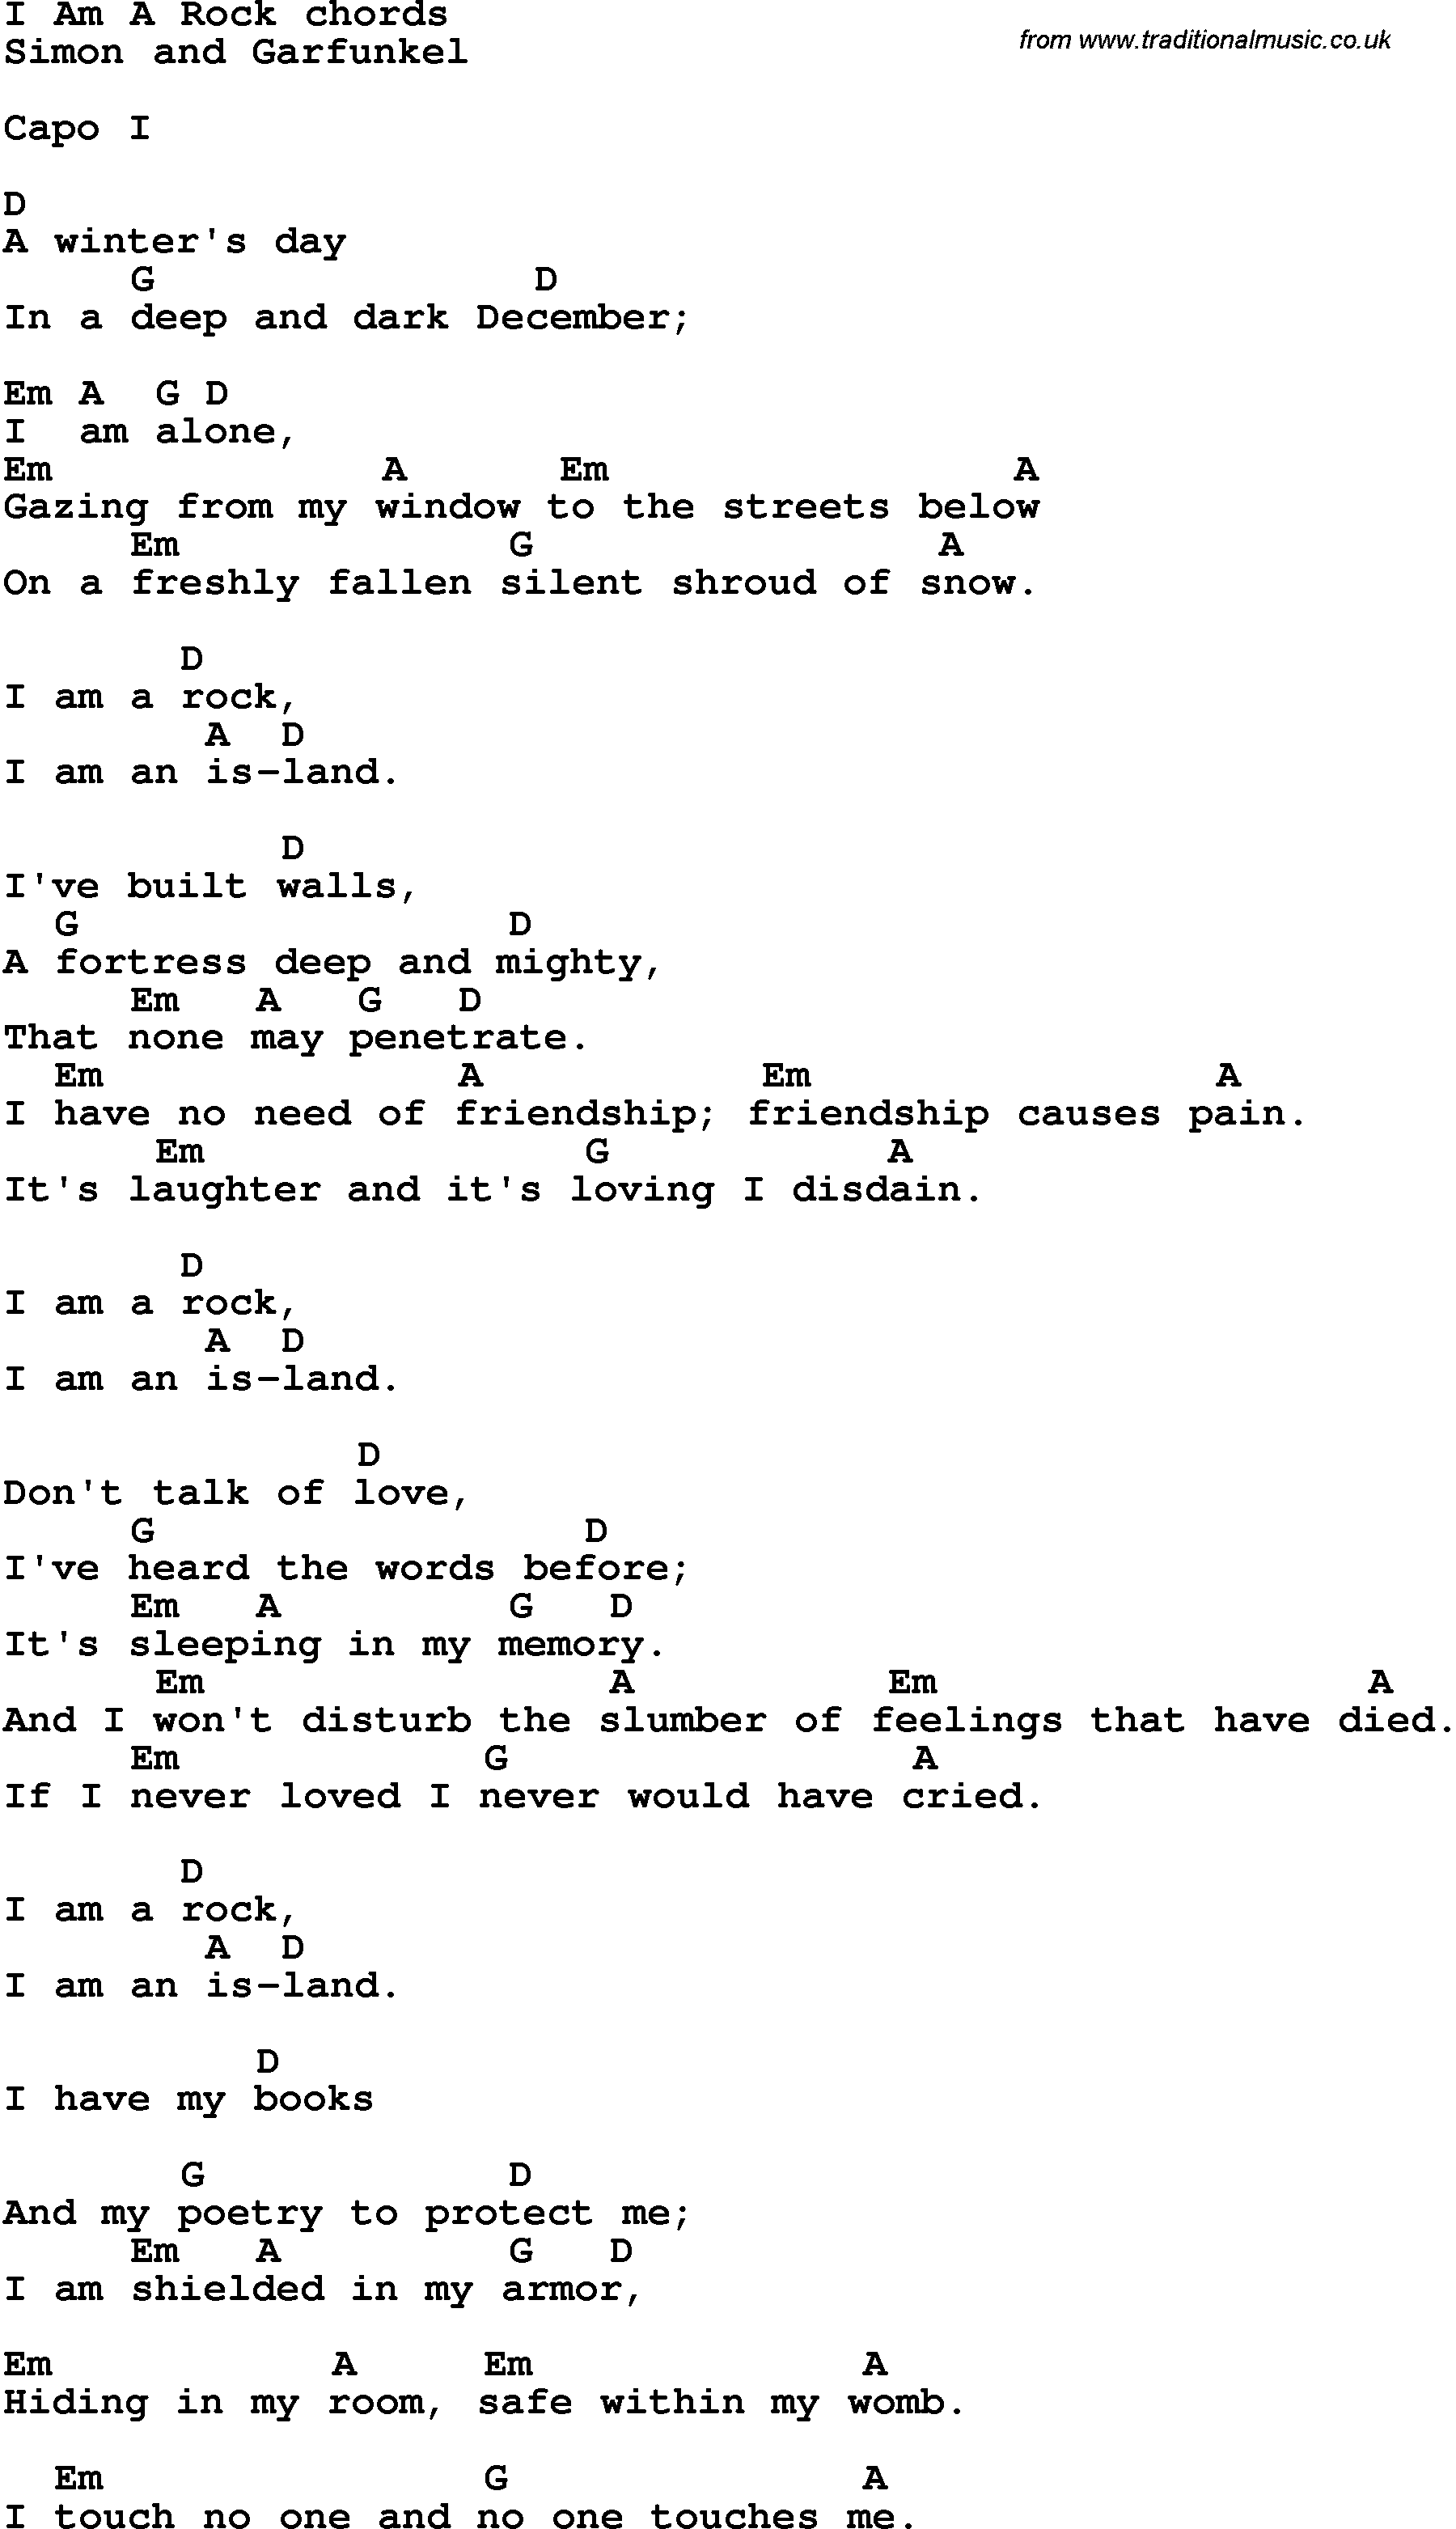 Song Lyrics with guitar chords for I Am A Rock